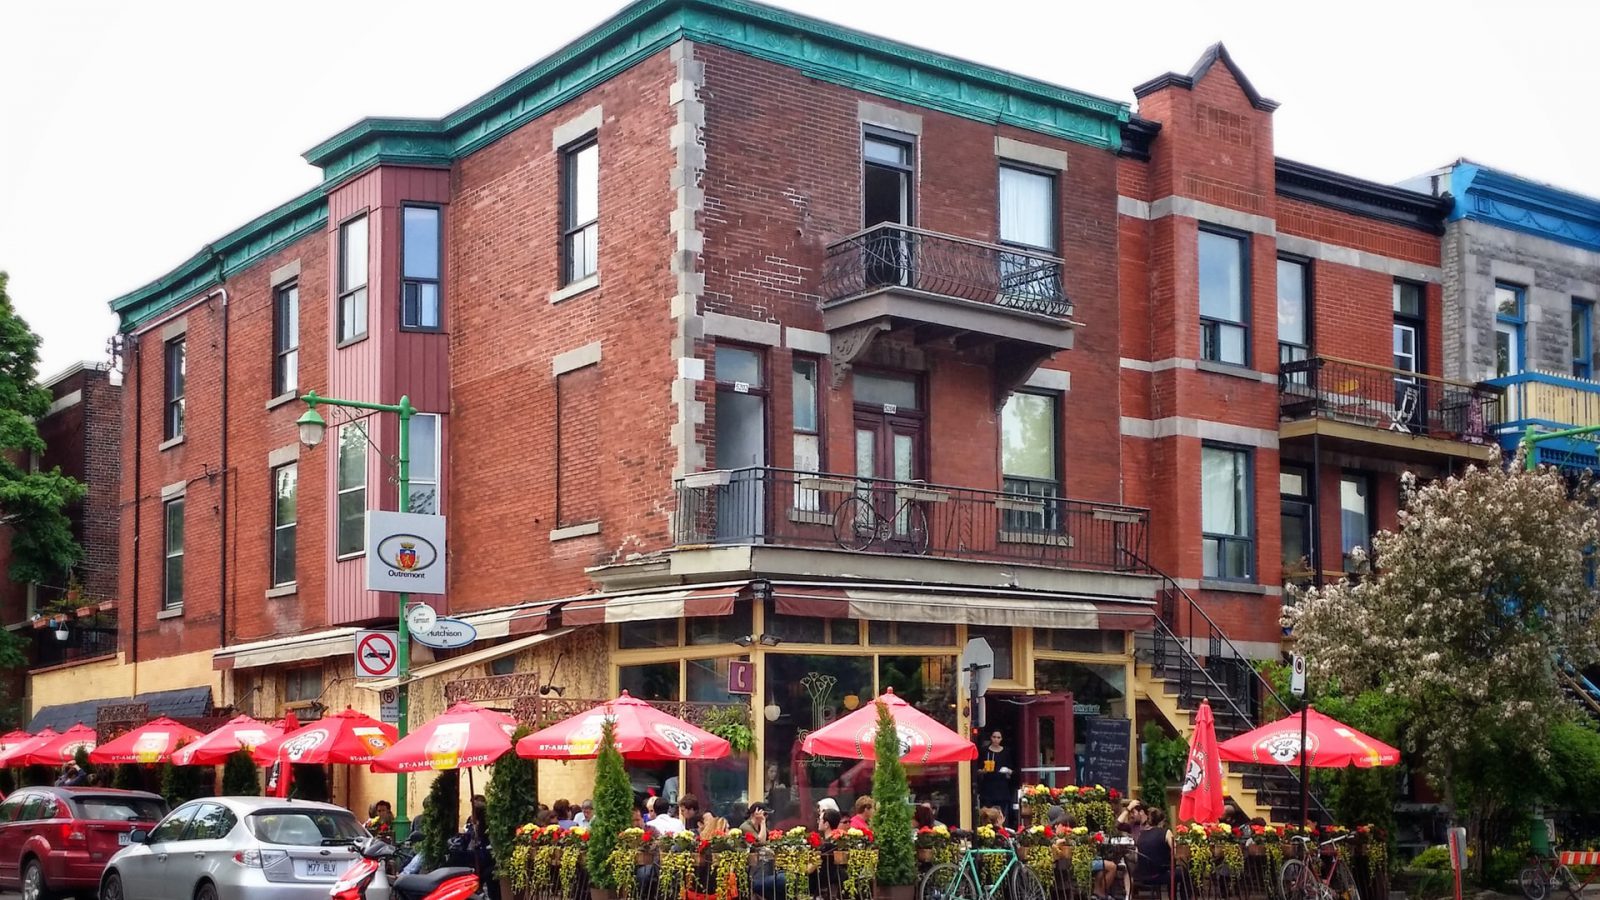 A restaurant patio, representing the reopening of certain establishments under Phase 2 in Ontario